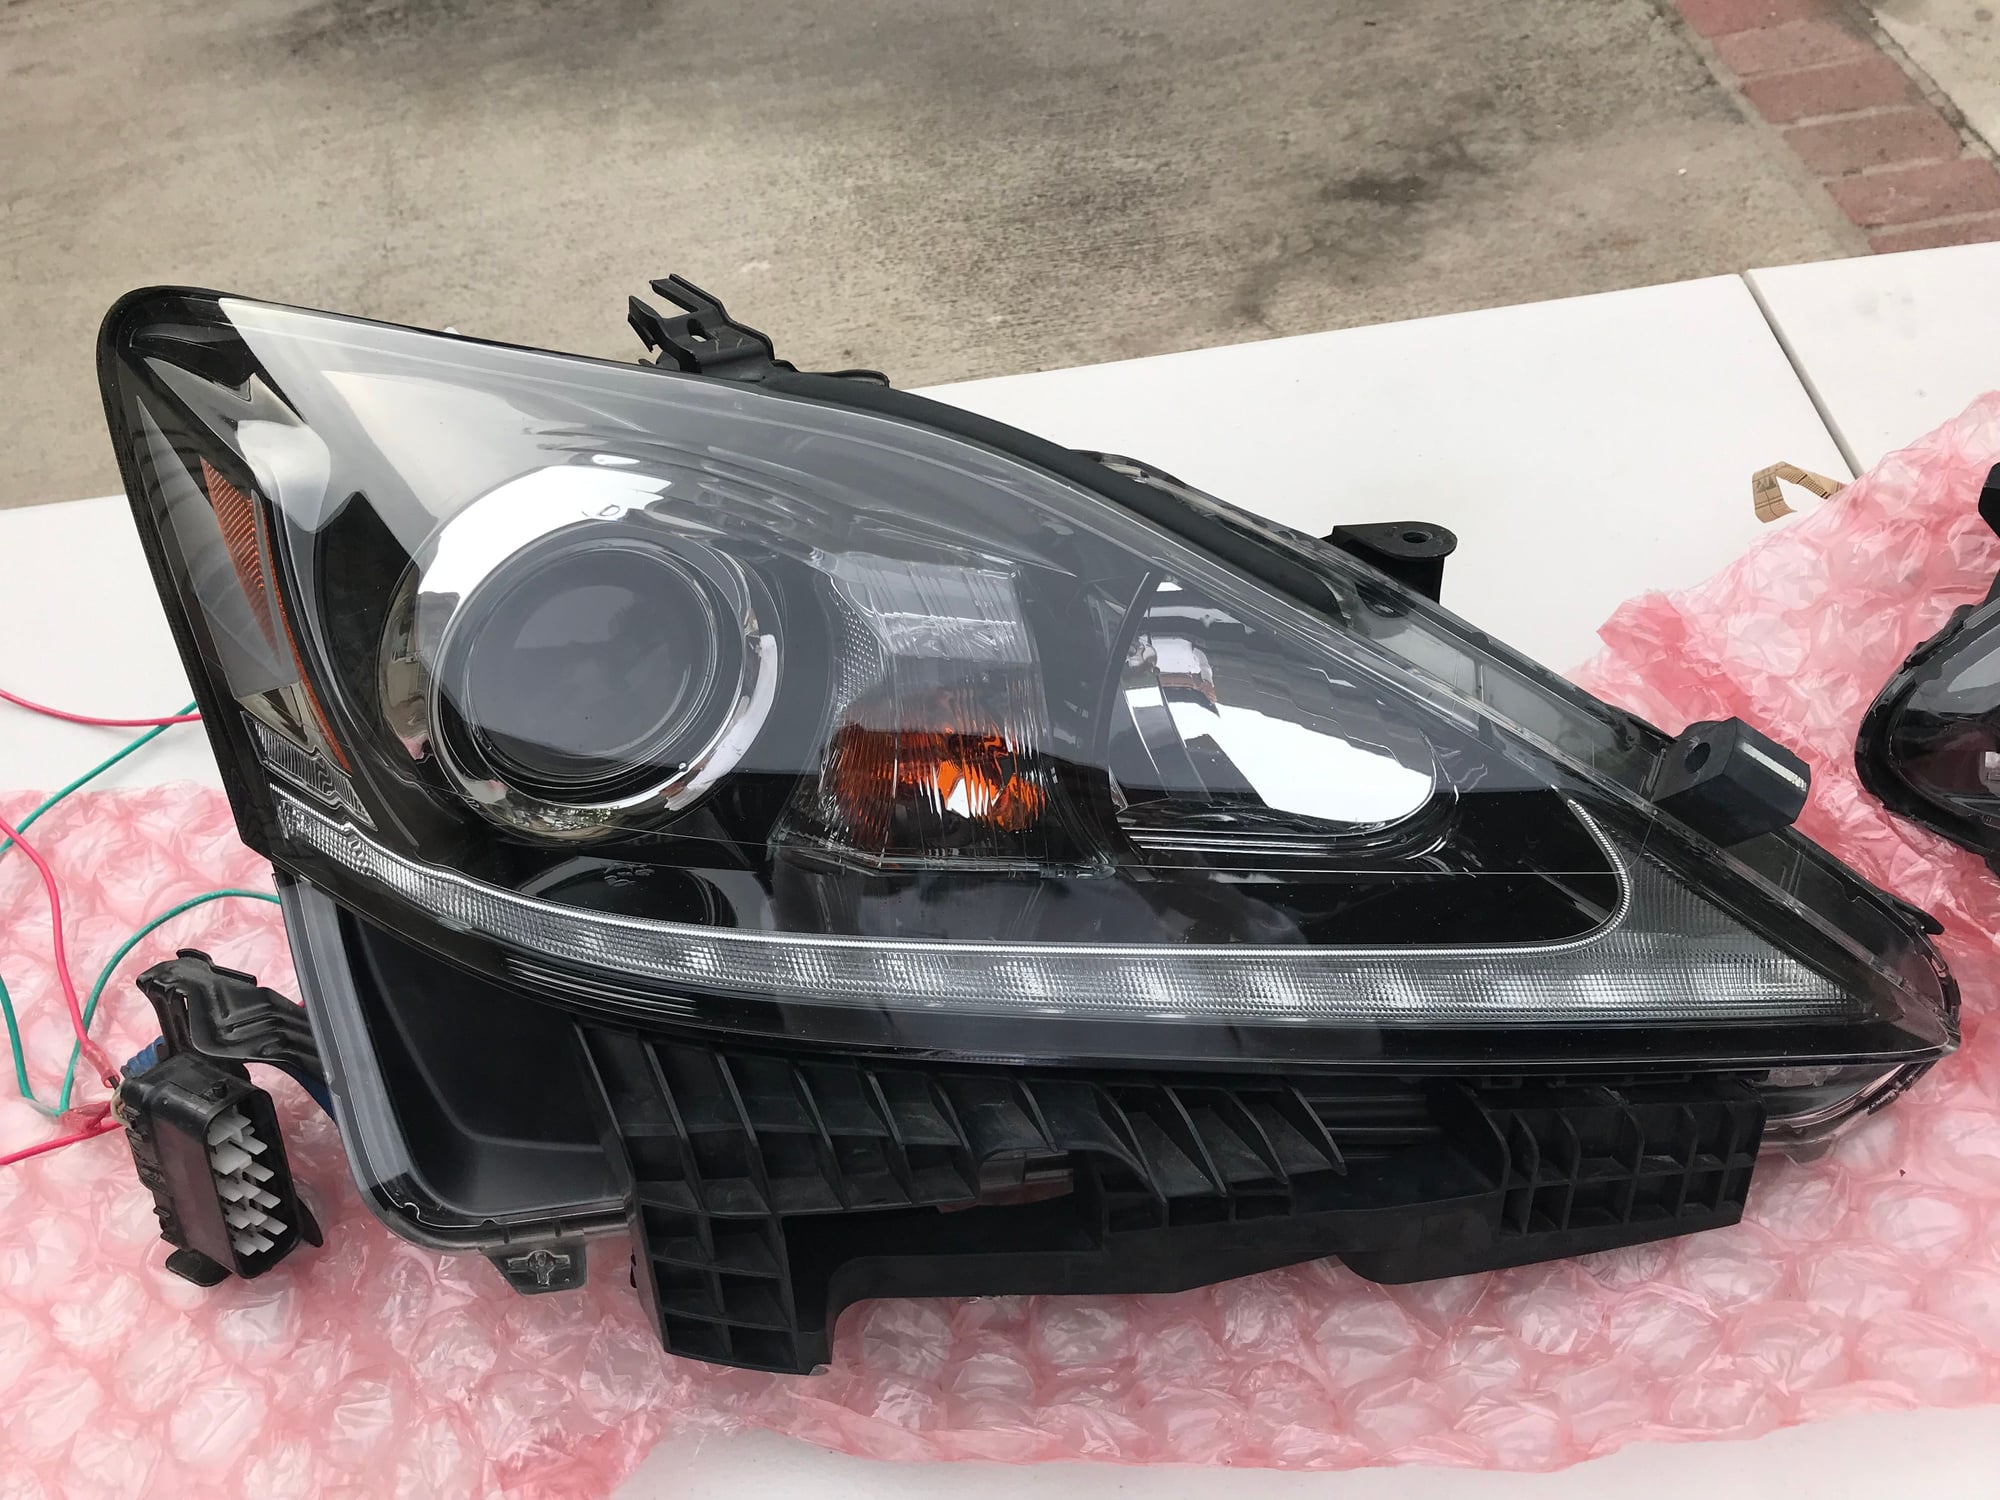 Lights - 2012 oem led headlight in great condition - Used - 2006 to 2014 Lexus IS350 - 2006 to 2014 Lexus IS250 - 2008 to 2014 Lexus IS F - Garden Grove, CA 92840, United States